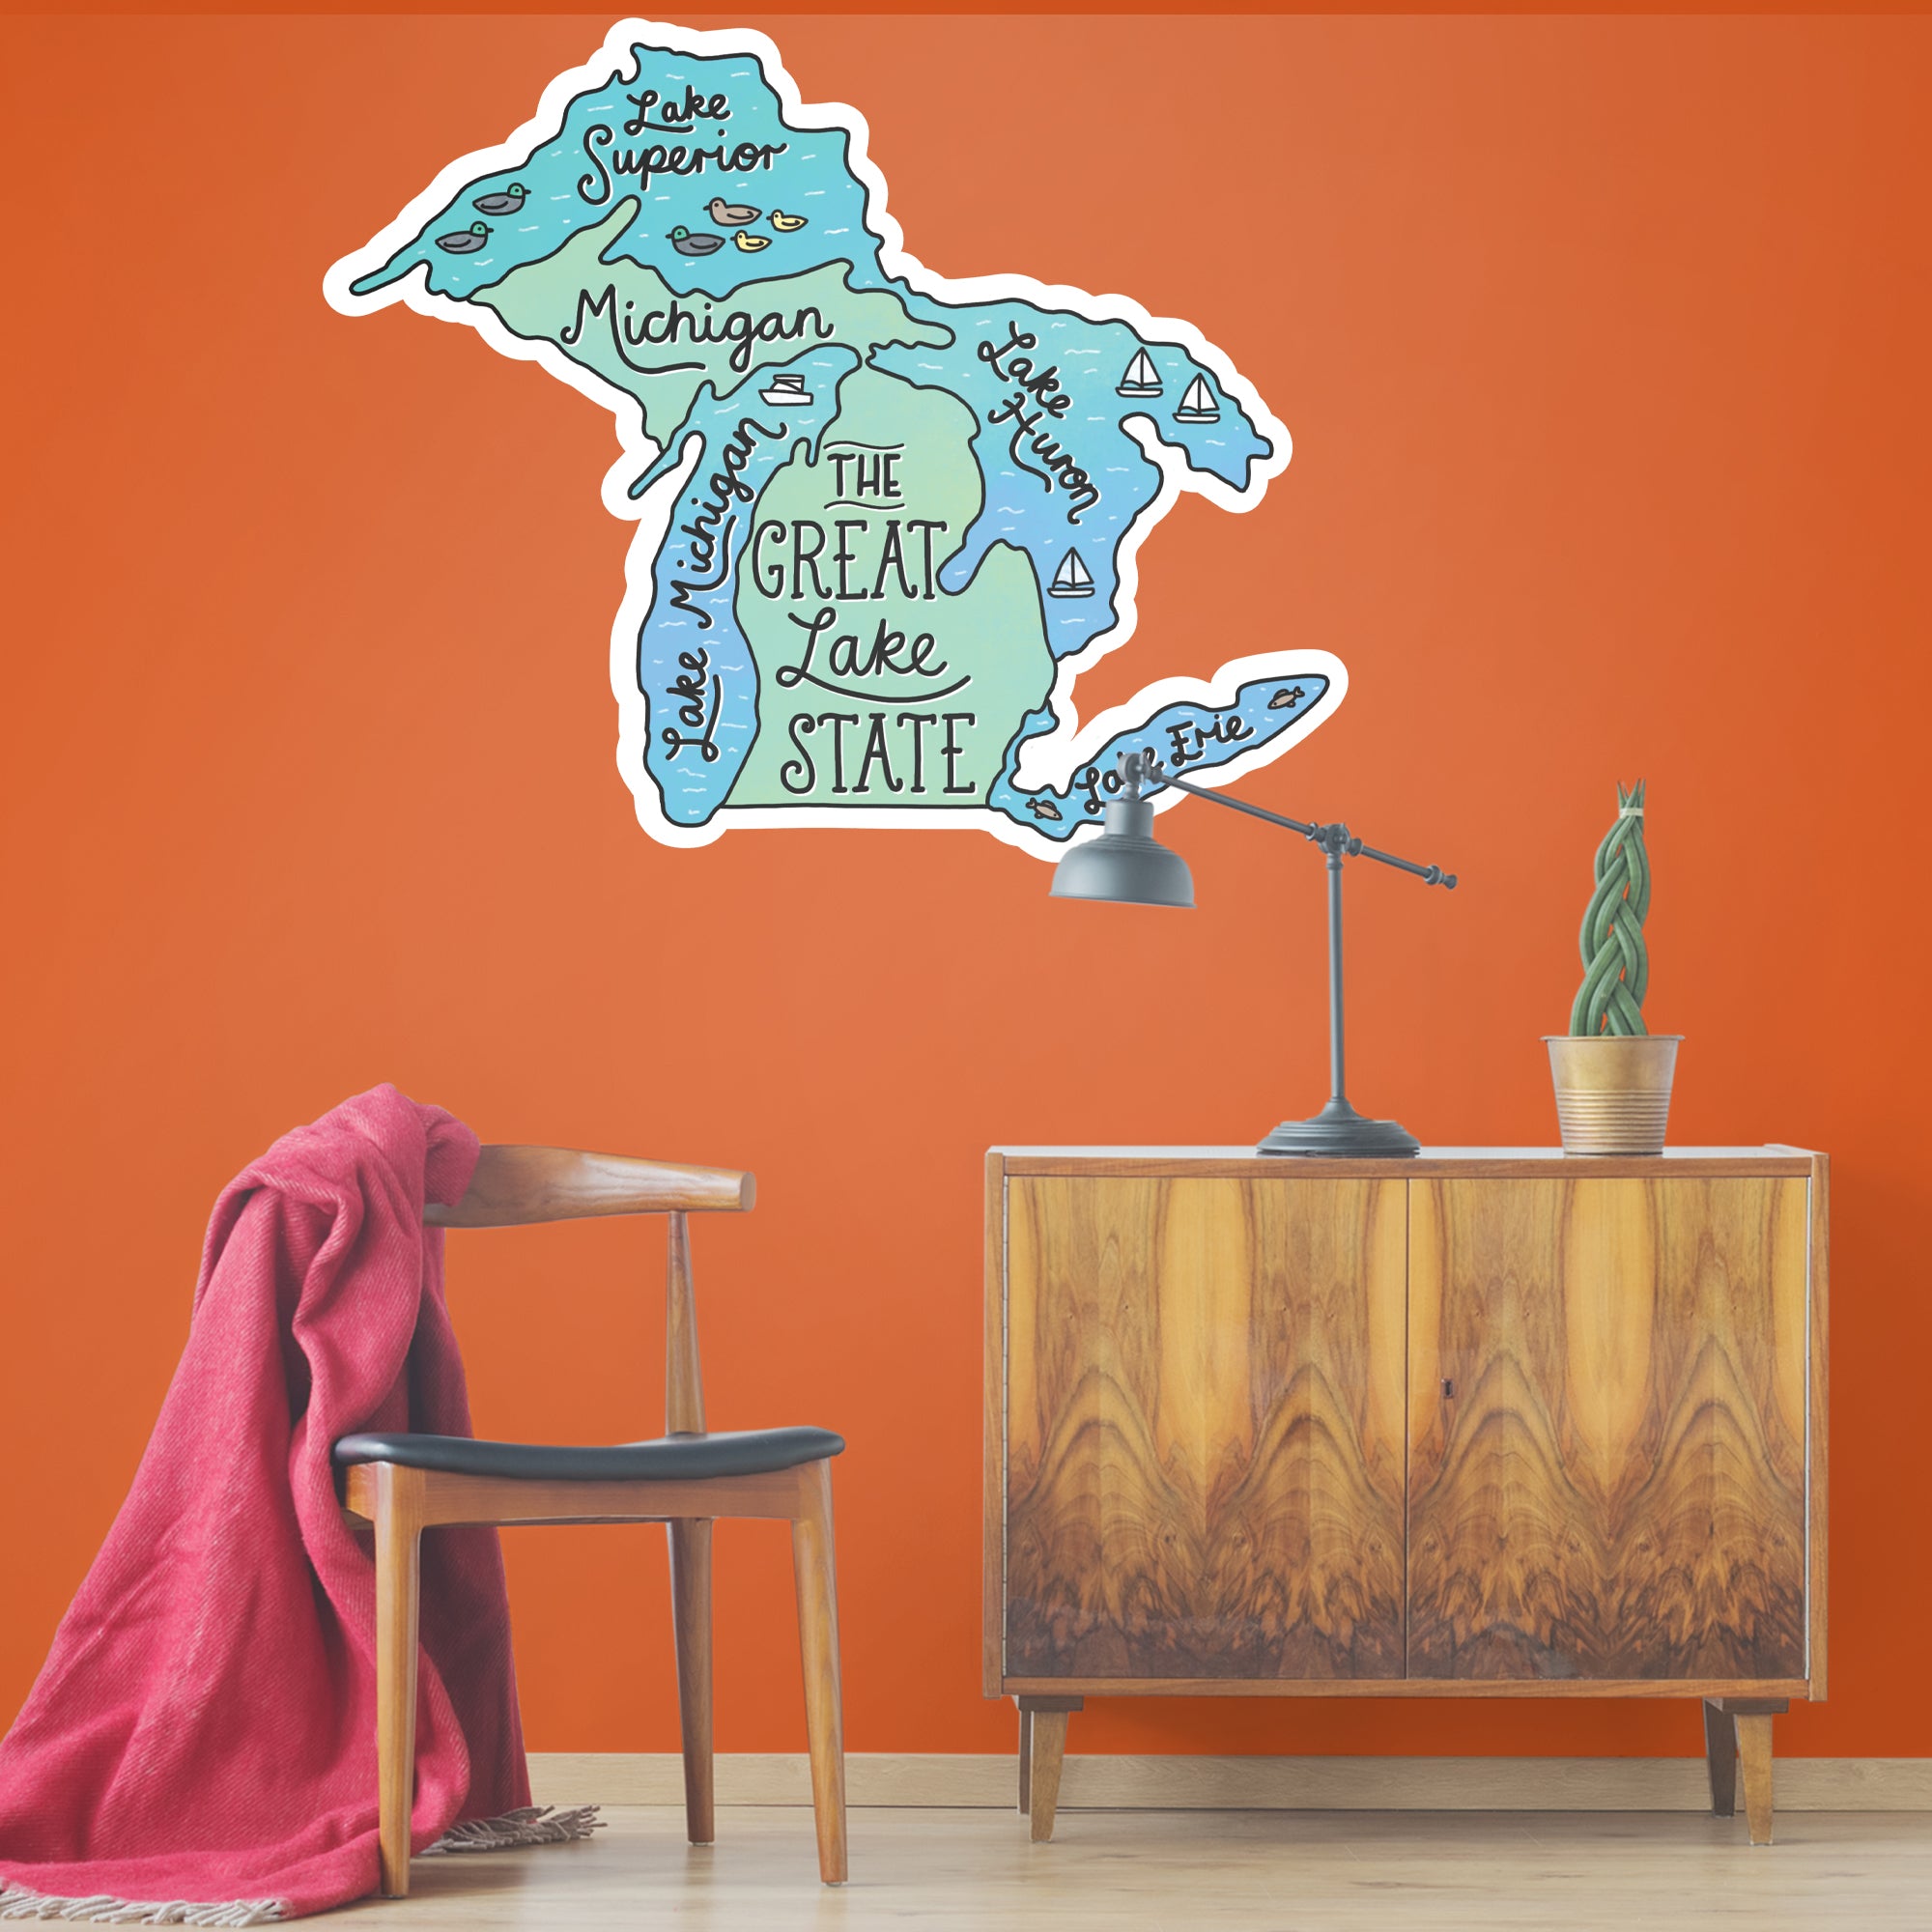 Michigan Lakes - Officially Licensed Big Moods Removable Wall Decal Giant Decal (45"W x 37"H) by Fathead | Vinyl